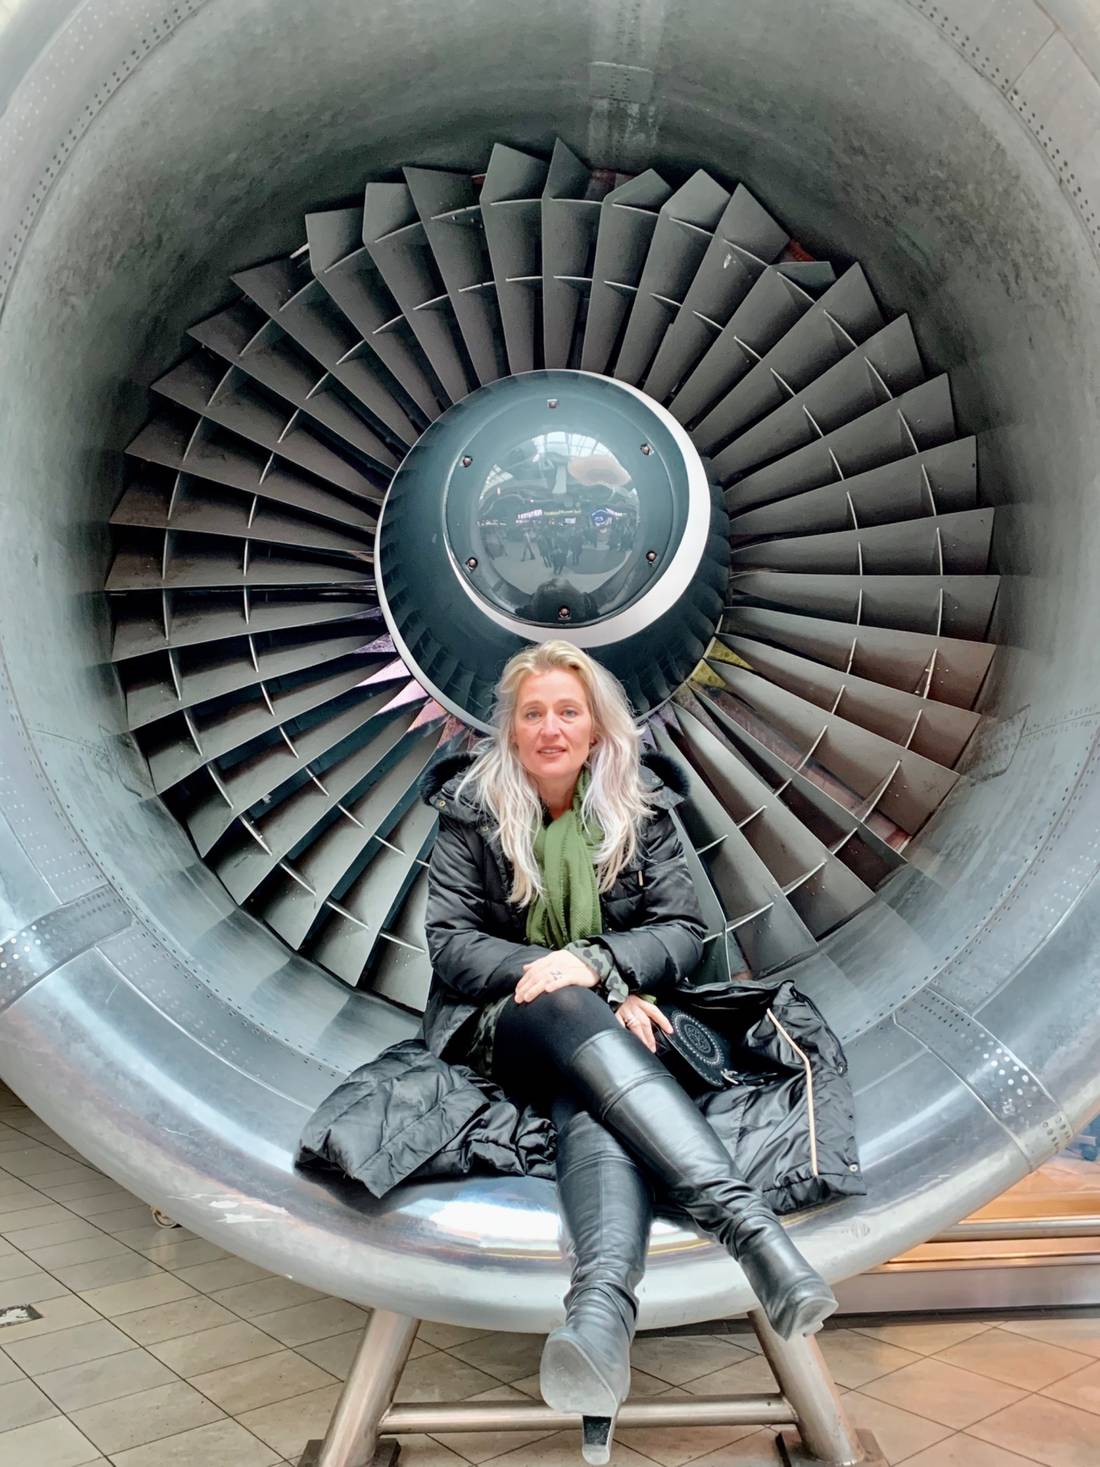 I still fit in a motor of a 717, and see above my head is a swirl, and that was to see if the motor is working.